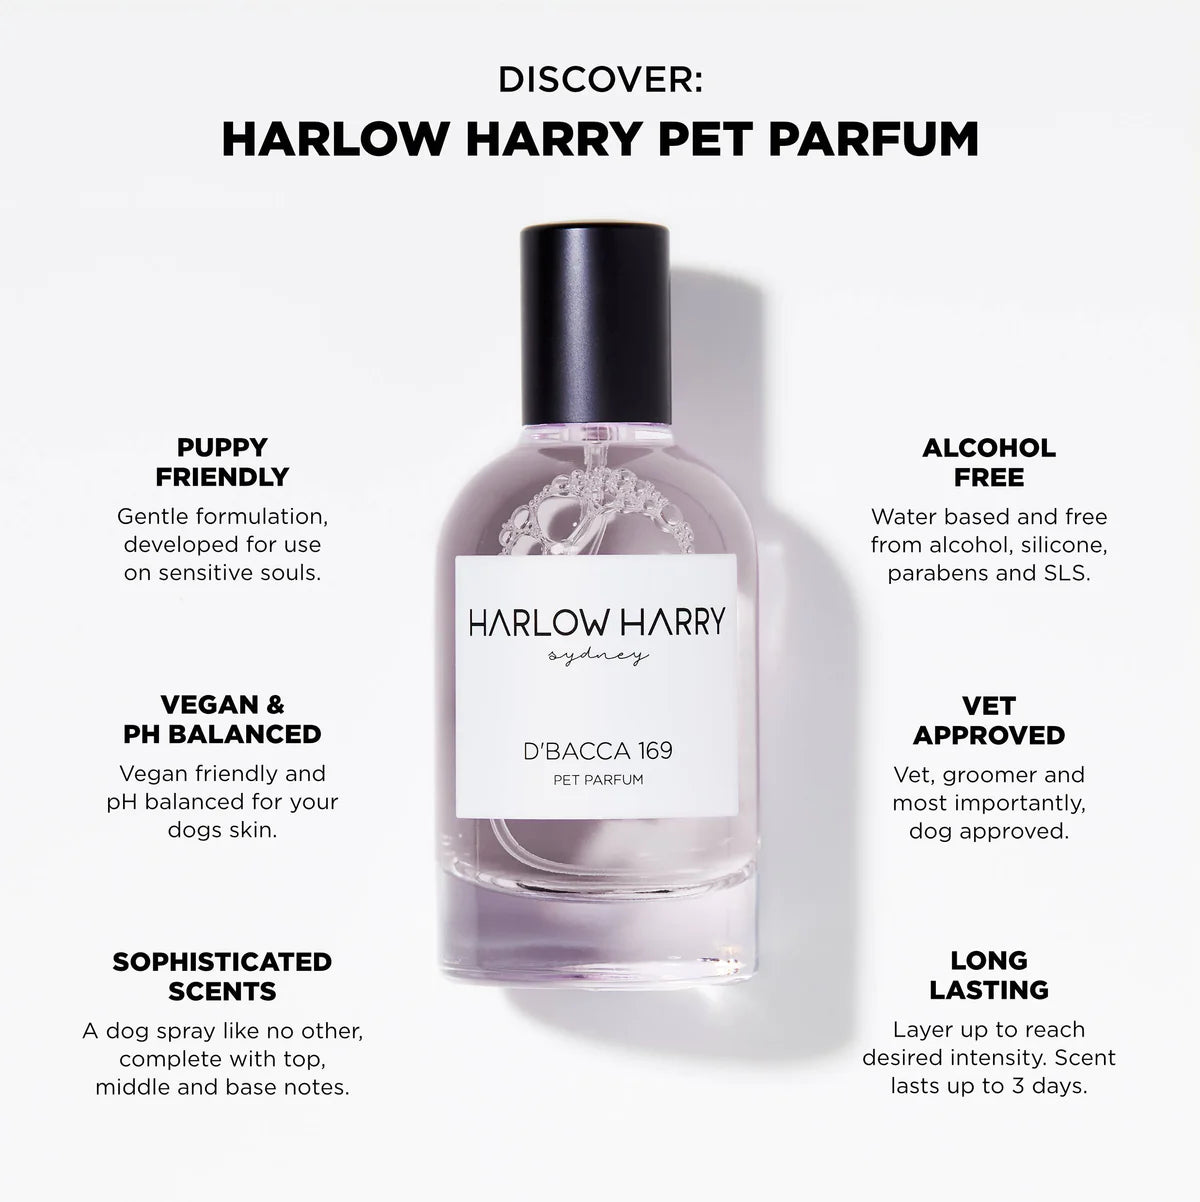 A modern, elegant advertisement for D'bacca 169 Dog Perfume by Harlow Harry, showcasing a sleek bottle of dog-friendly, vegan, PH-balanced, alcohol-free fragrance designed for a sophisticated and long-lasting scent with cedar mus